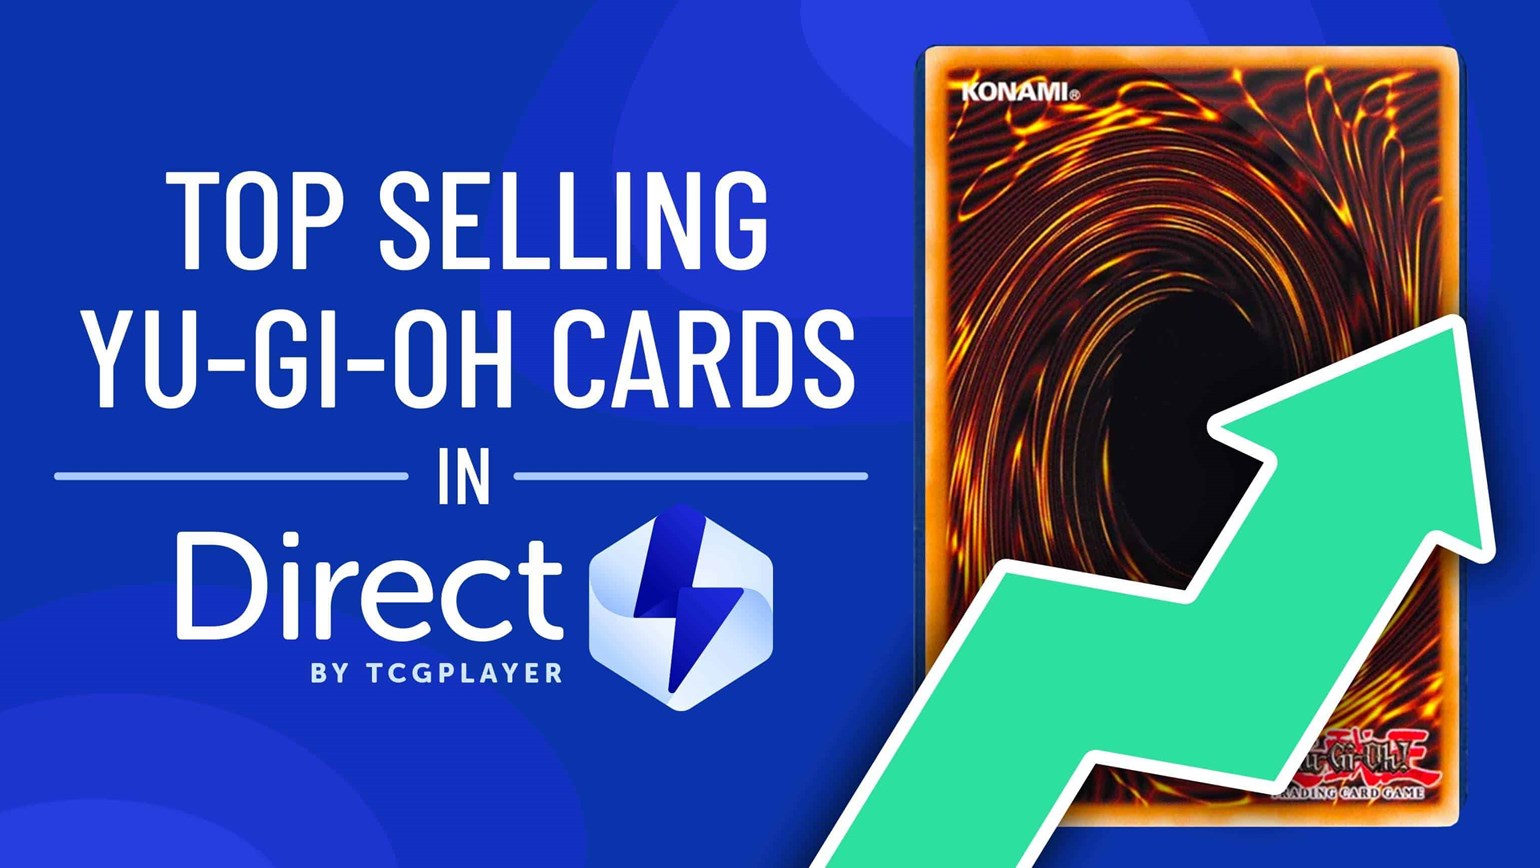 August Top Selling Yu-Gi-Oh! Cards in Direct by TCGplayer